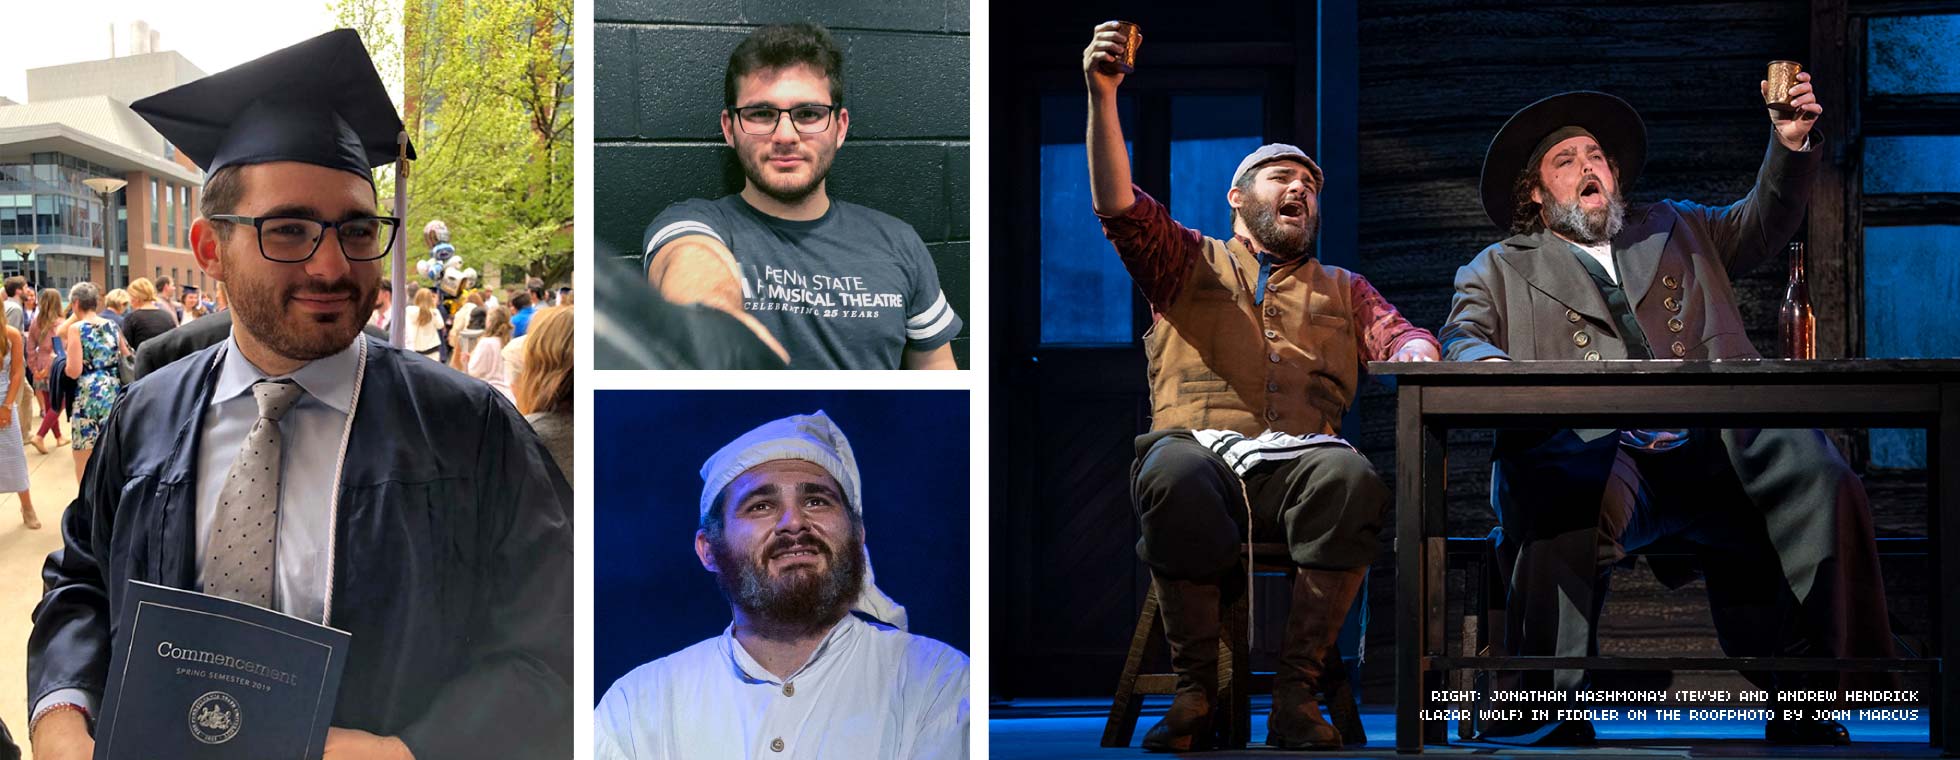 A photo collage of Jonathan Hashmonay in Fiddler on the Roof and as a student at Penn State.